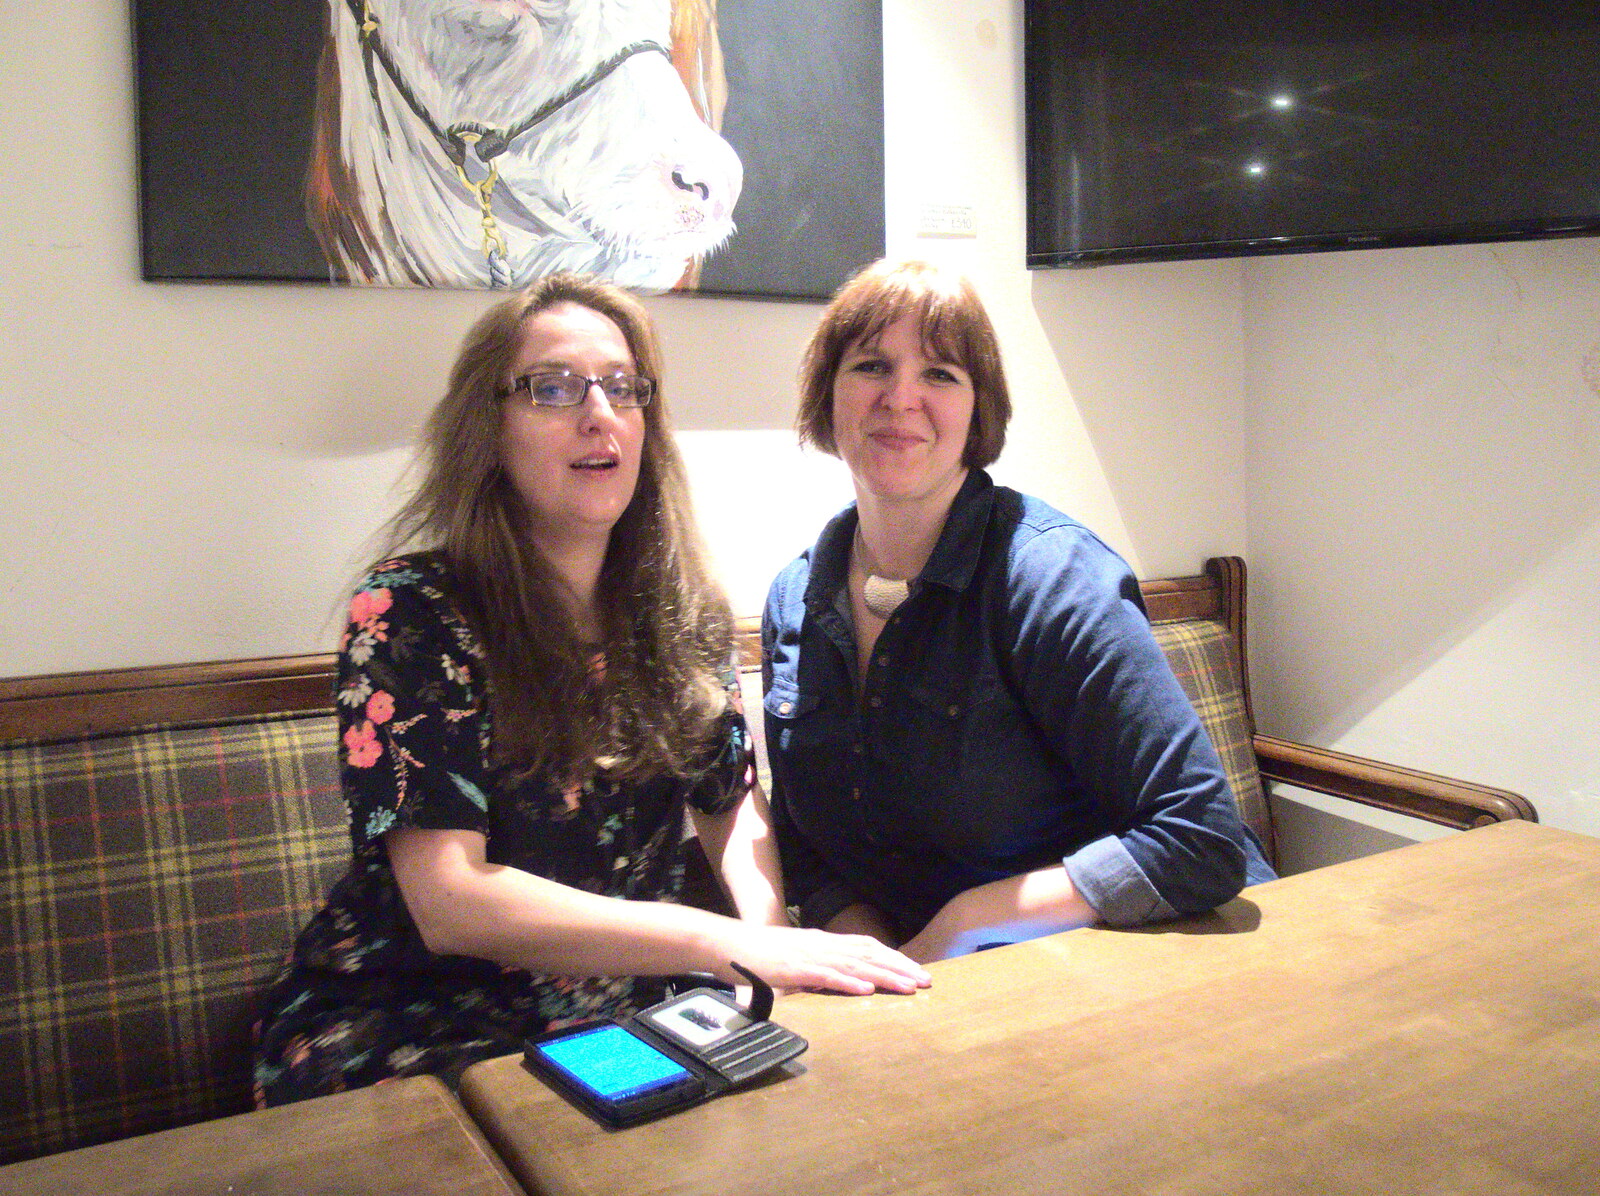 Suey and Sarah from New Year's Eve, The Oaksmere, Brome, Suffolk - 31st December 2016